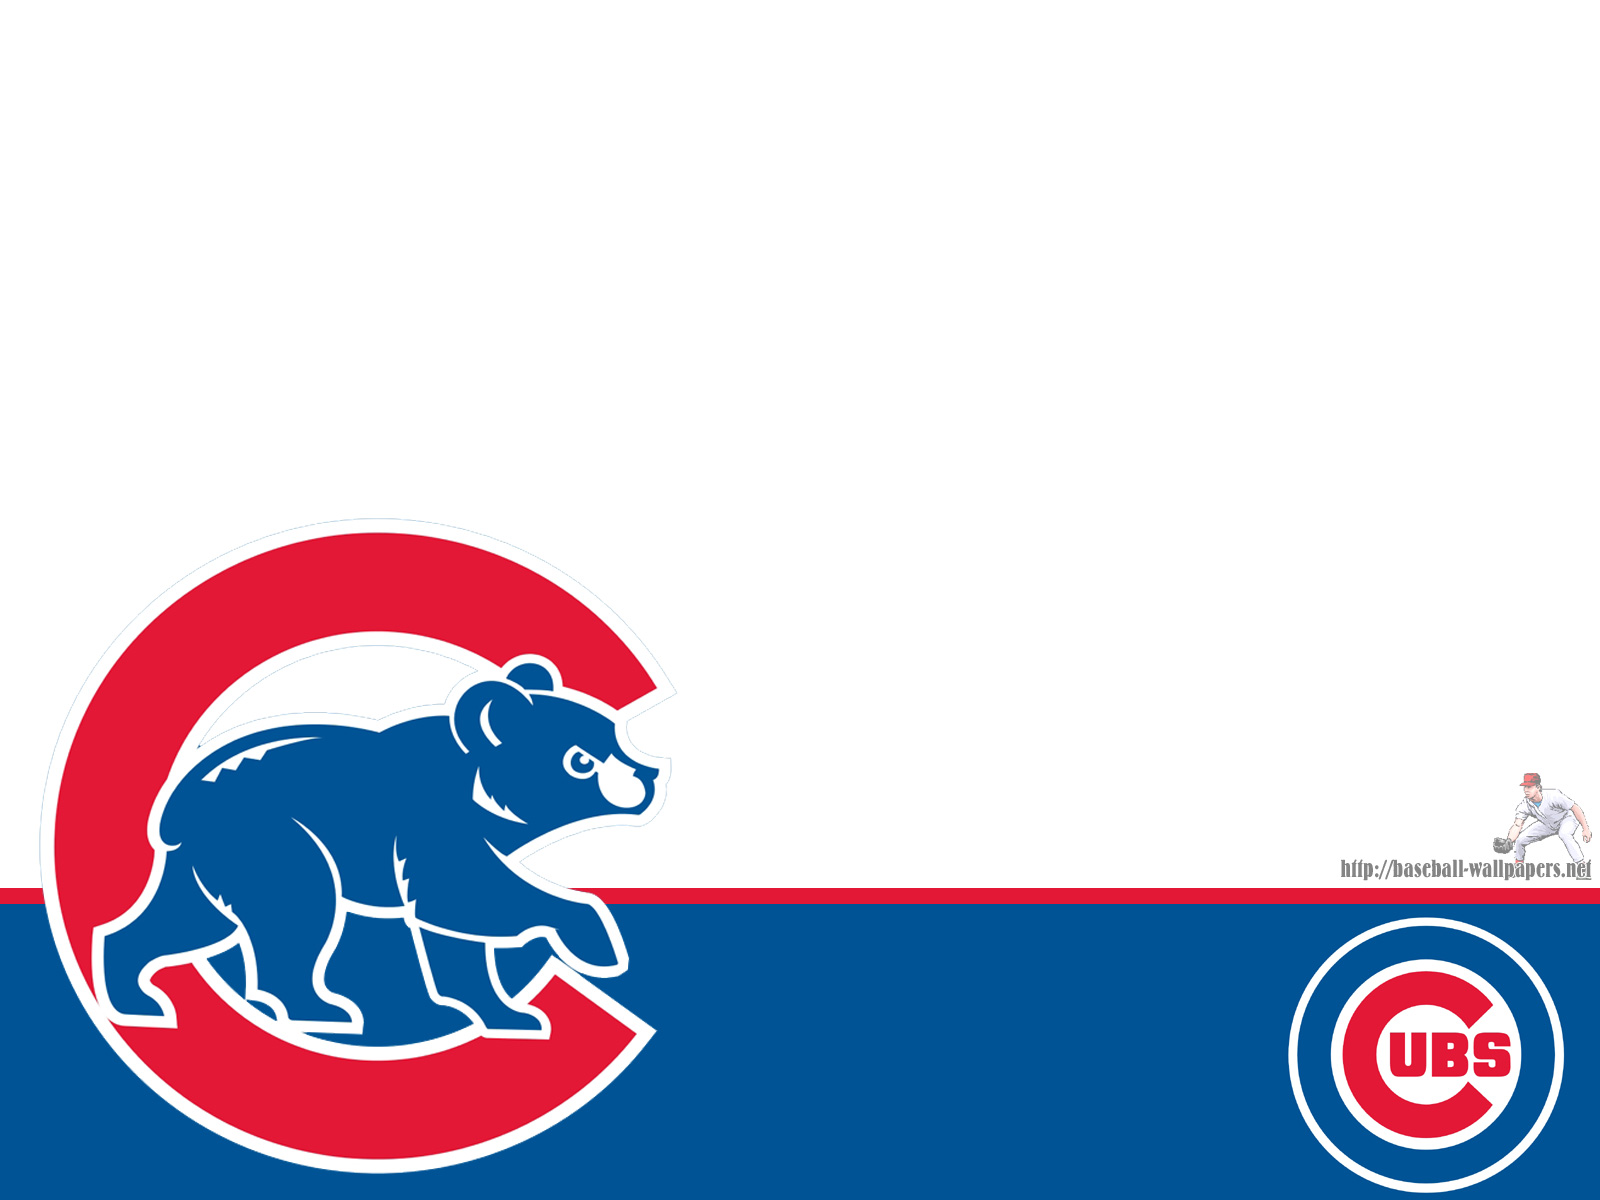 Cubs Wallpaper Iphone Chicago cubs wallpapers